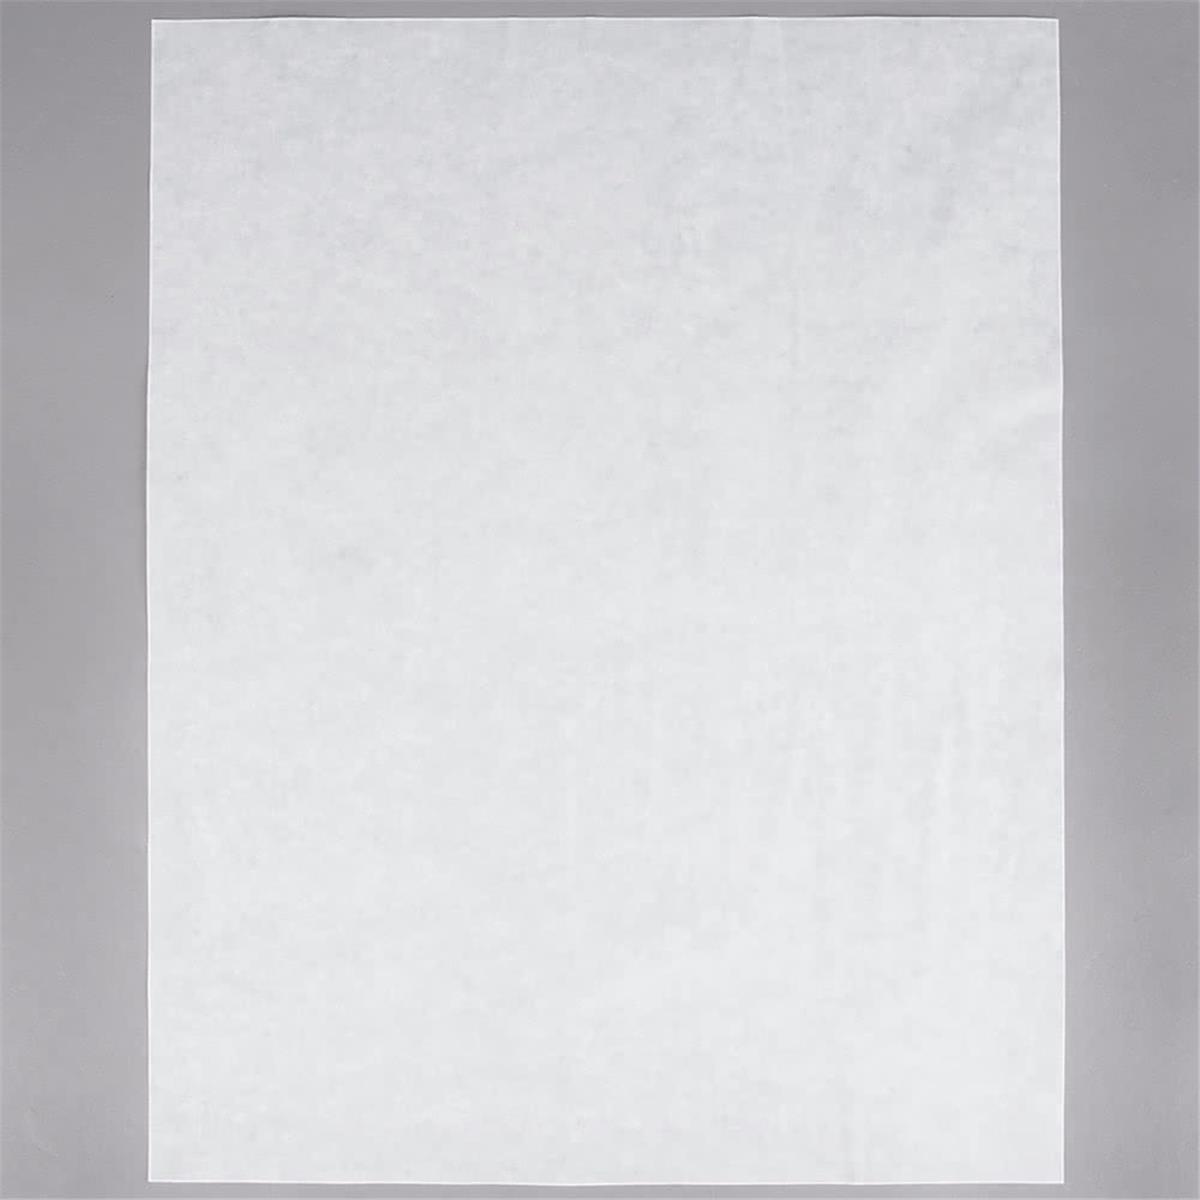 1820dw Cpc 18 X 20 In. Dry Wax Sheets, White - Case Of 1395